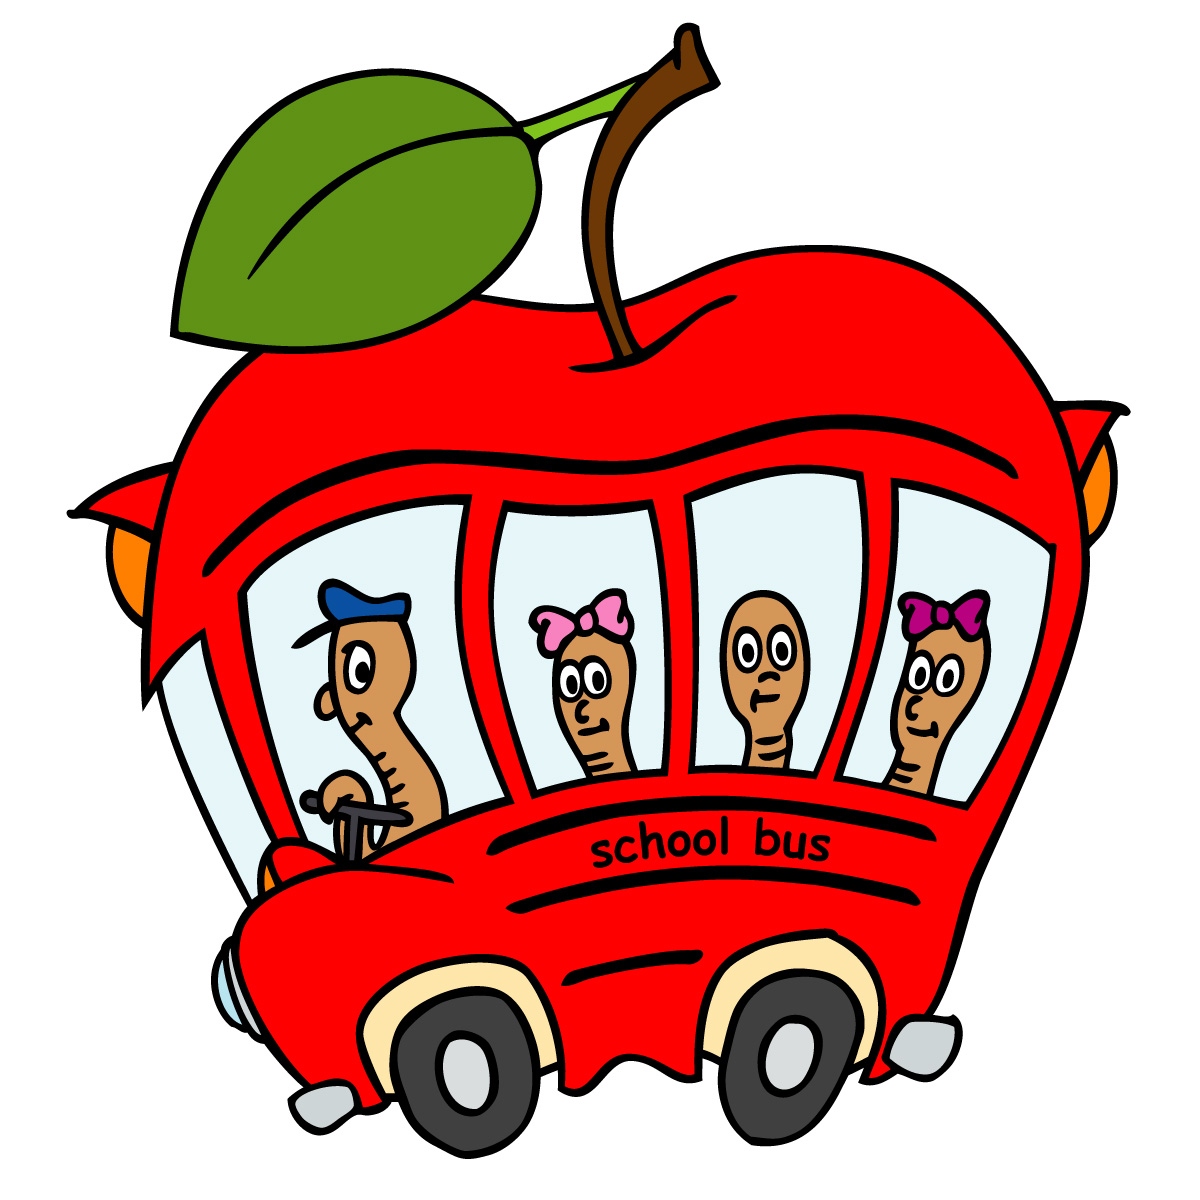 Driving school bus funny clipart